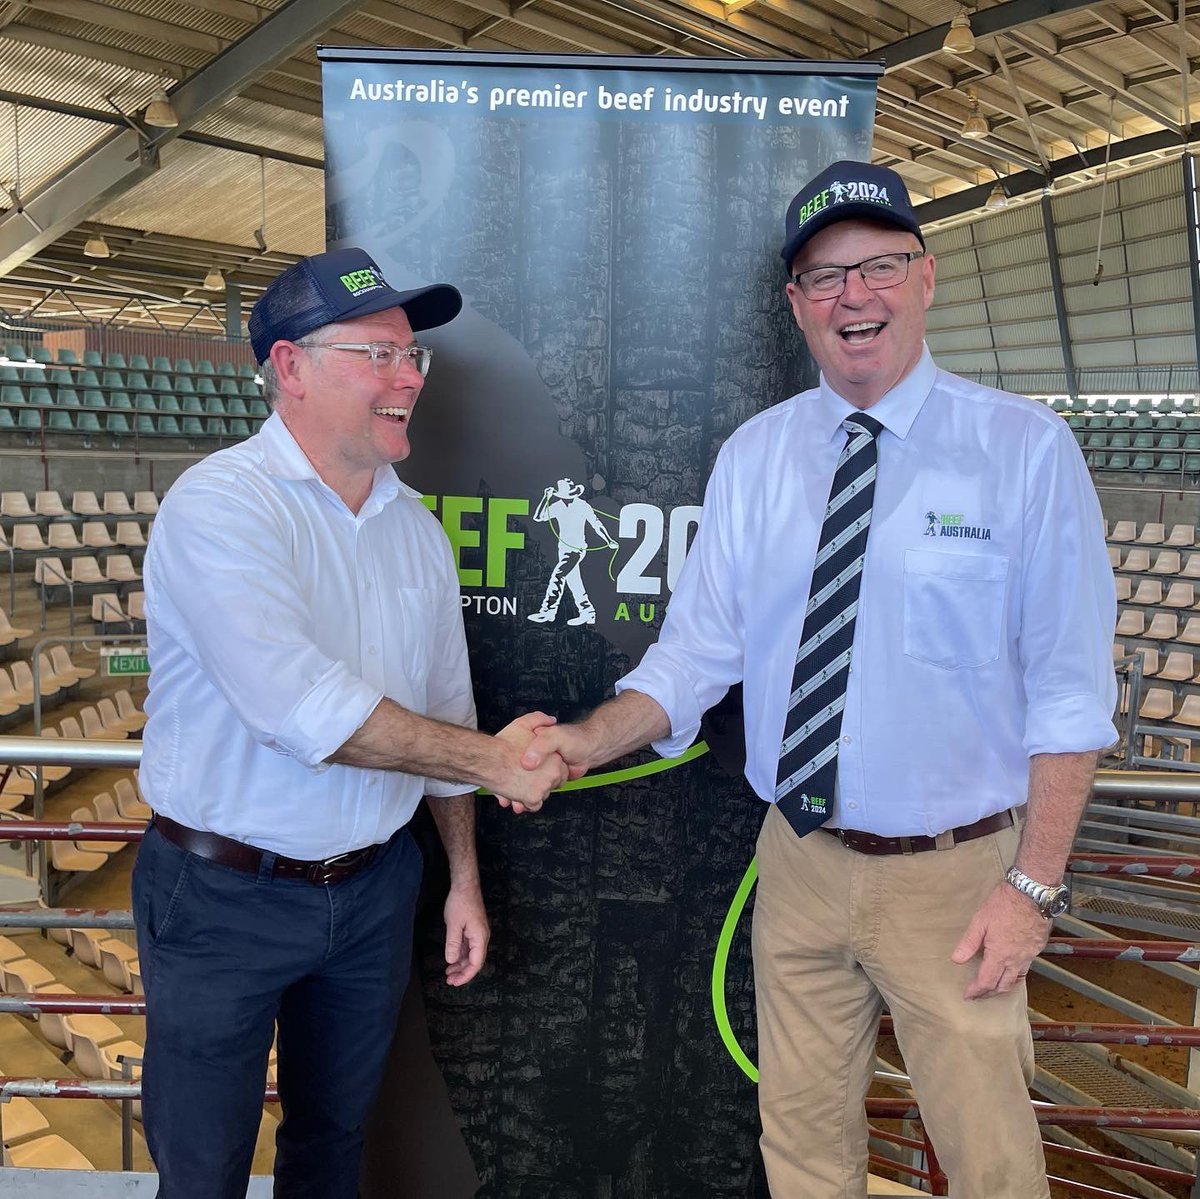 Back in Rocky to announce we’re delivering on our promise to invest $6M to expand @BeefAustralia Week 2024 - a massive trade show for our beef industry.